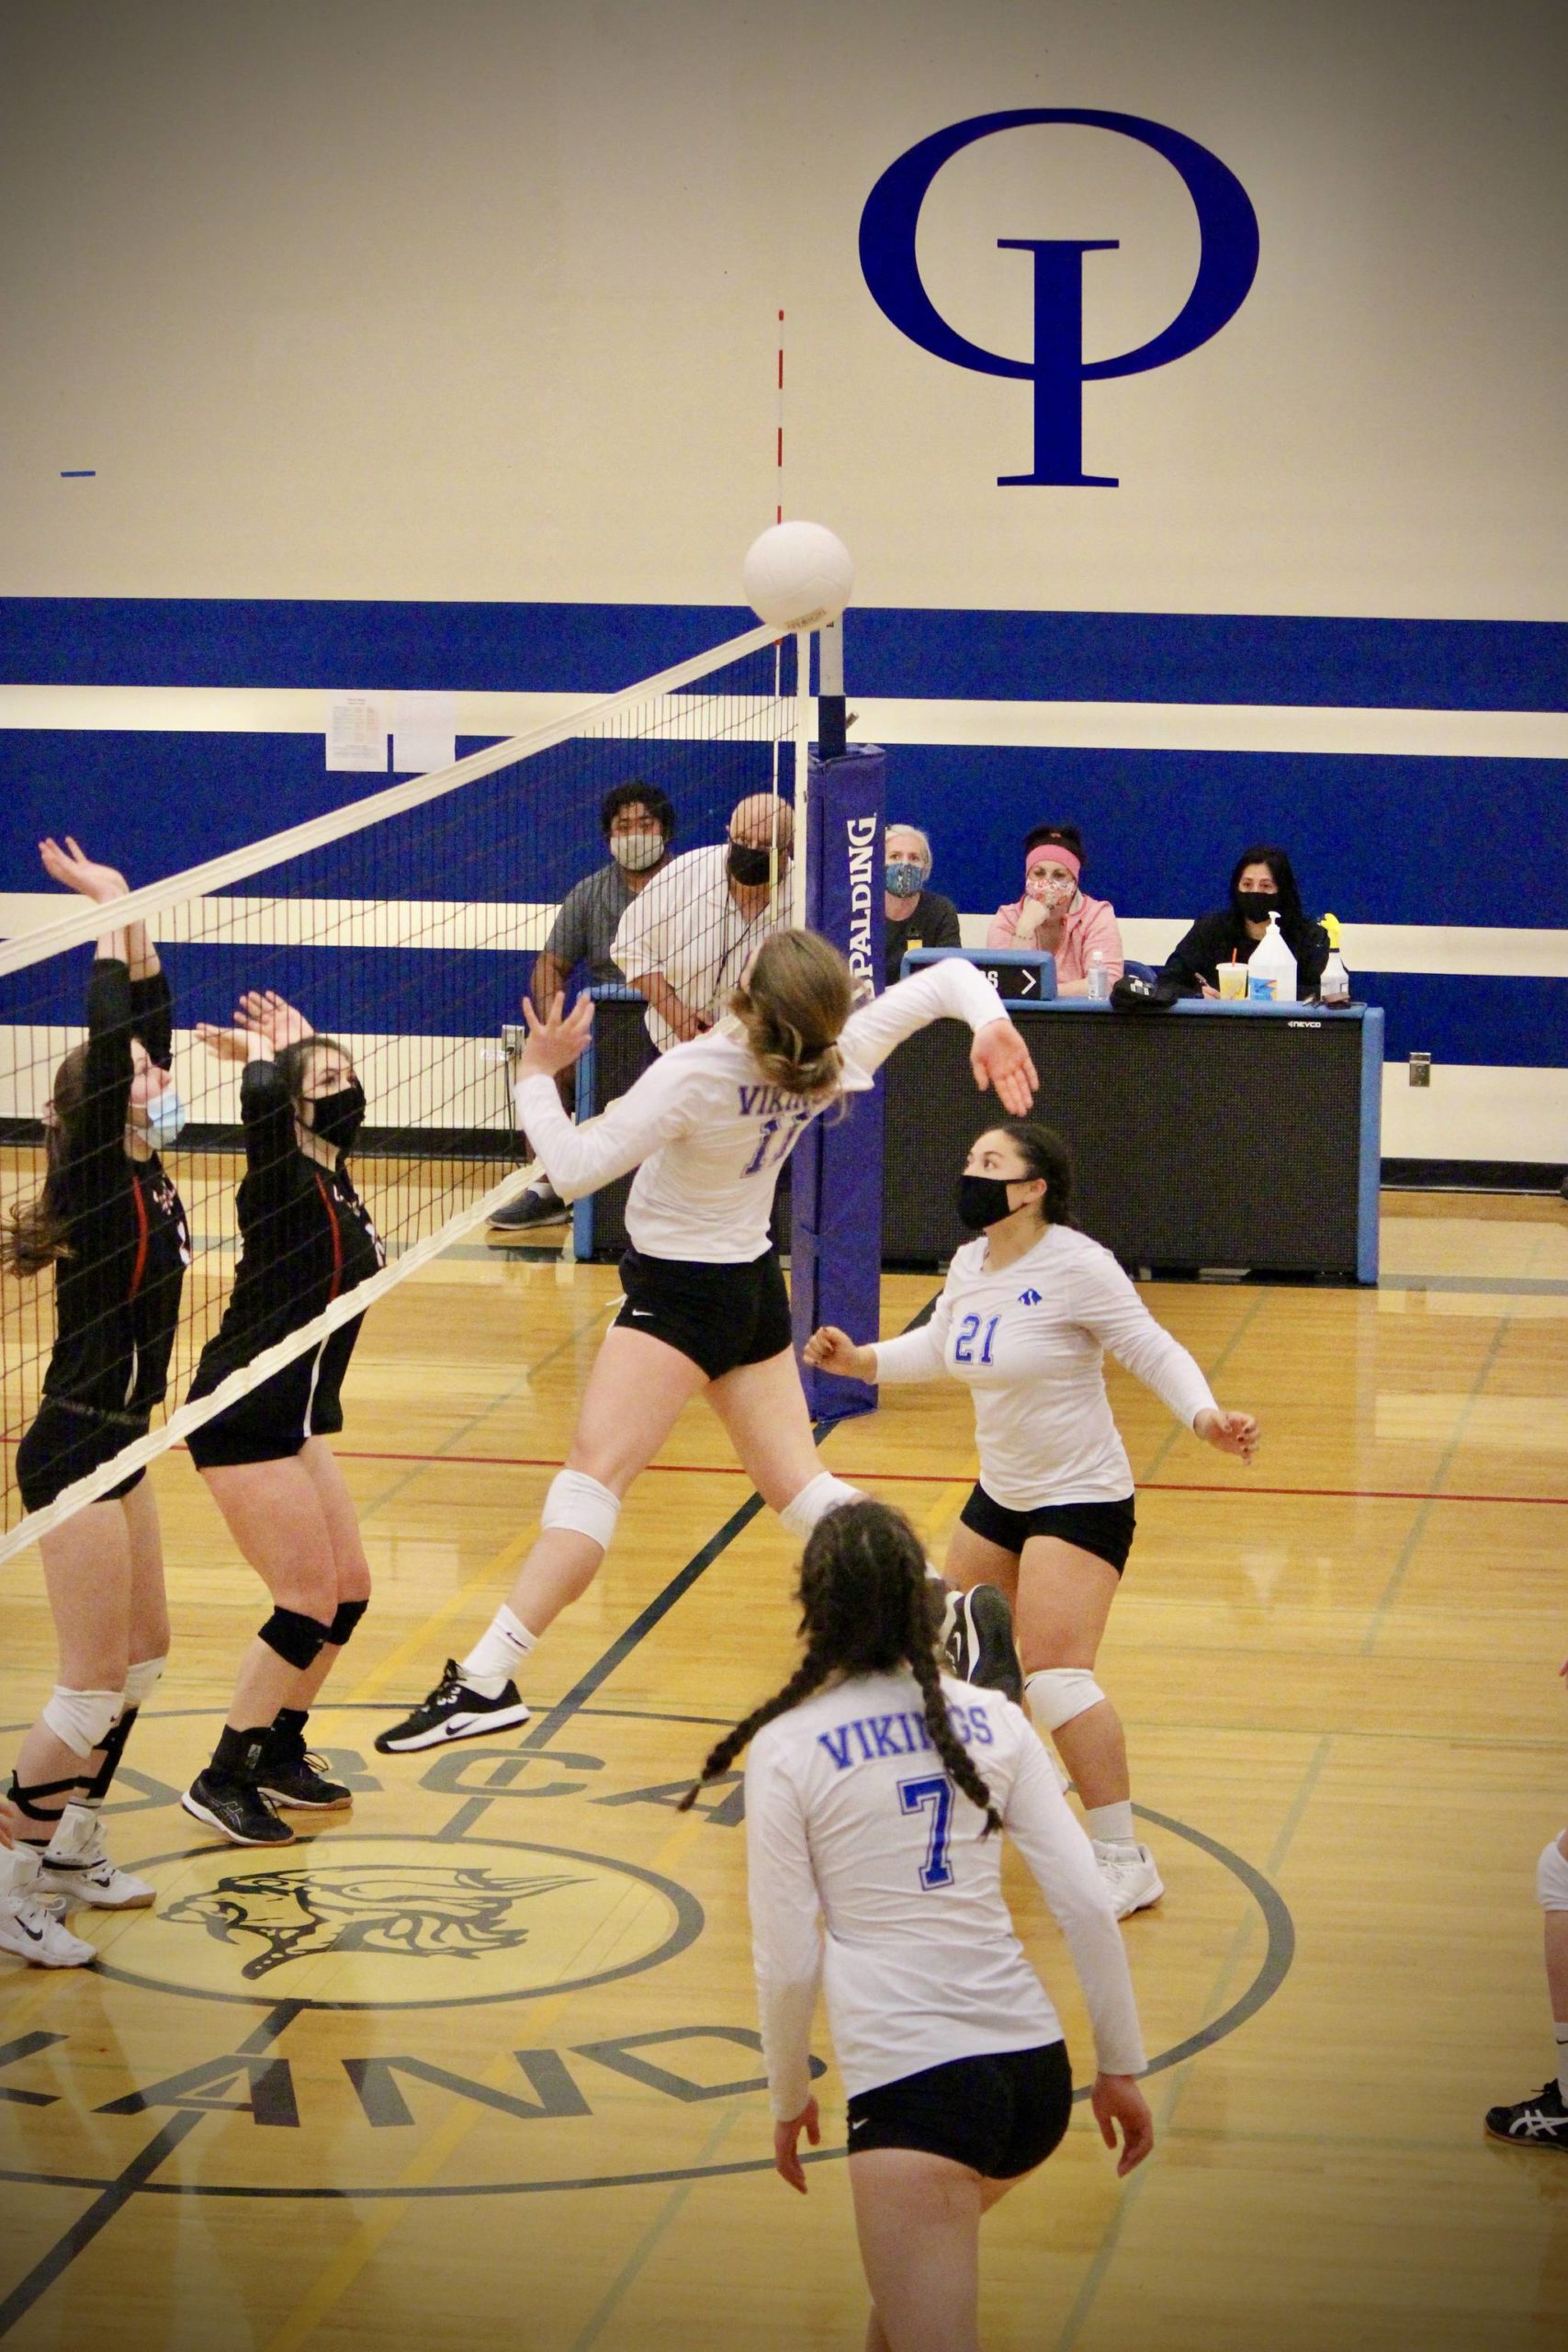 Corey Wiscomb/contributed photo
Tayla Malo (21) and Seraphine Knapp (7) stay ready as Lindsey Simpson (11) swings for the kill.